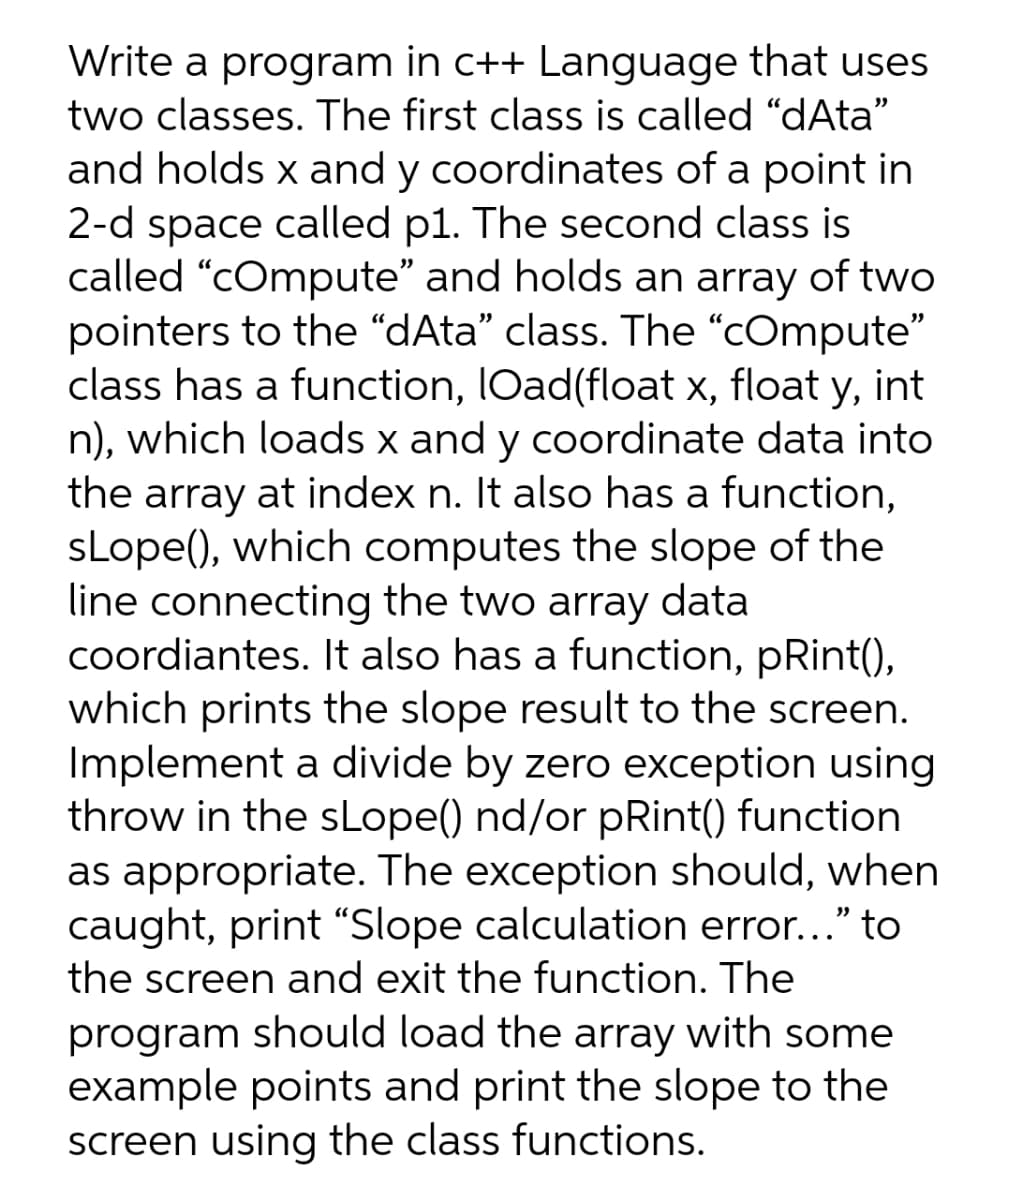 Write a program in c++ Language that uses
two classes. The first class is called "dAta"
and holds x and y coordinates of a point in
2-d space called p1. The second class is
called "cOmpute" and holds an array of two
pointers to the “dAta" class. The "cOmpute"
class has a function, IOad(float x, float y, int
n), which loads x and y coordinate data into
the array at index n. It also has a function,
sLope(), which computes the slope of the
line connecting the two array data
coordiantes. It also has a function, pRint(),
which prints the slope result to the screen.
Implement a divide by zero exception using
throw in the sLope() nd/or pRint() function
as appropriate. The exception should, when
caught, print "Slope calculation error..." to
the screen and exit the function. The
program should load the array with some
example points and print the slope to the
screen using the class functions.
